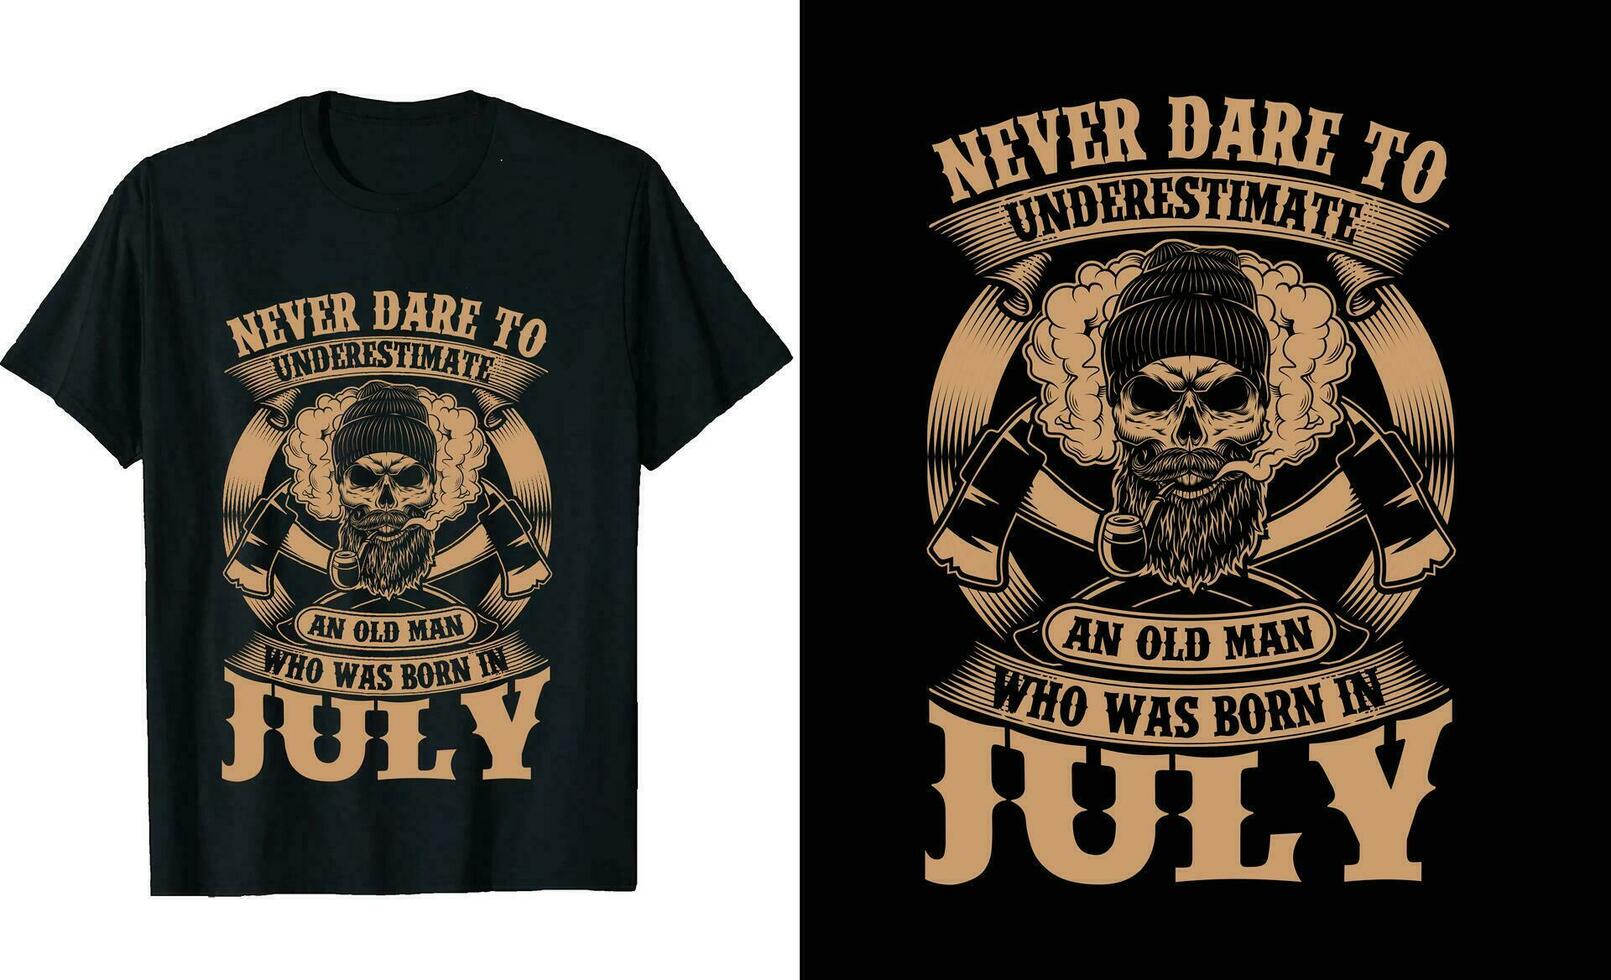 Never underestimate an old man who was born in or birthday tshirt design or Viking Themed 12 Month's T-shirt Design or veteran t-shirt design, Poster Design, t shirt templete or Classic T-Shirt vector